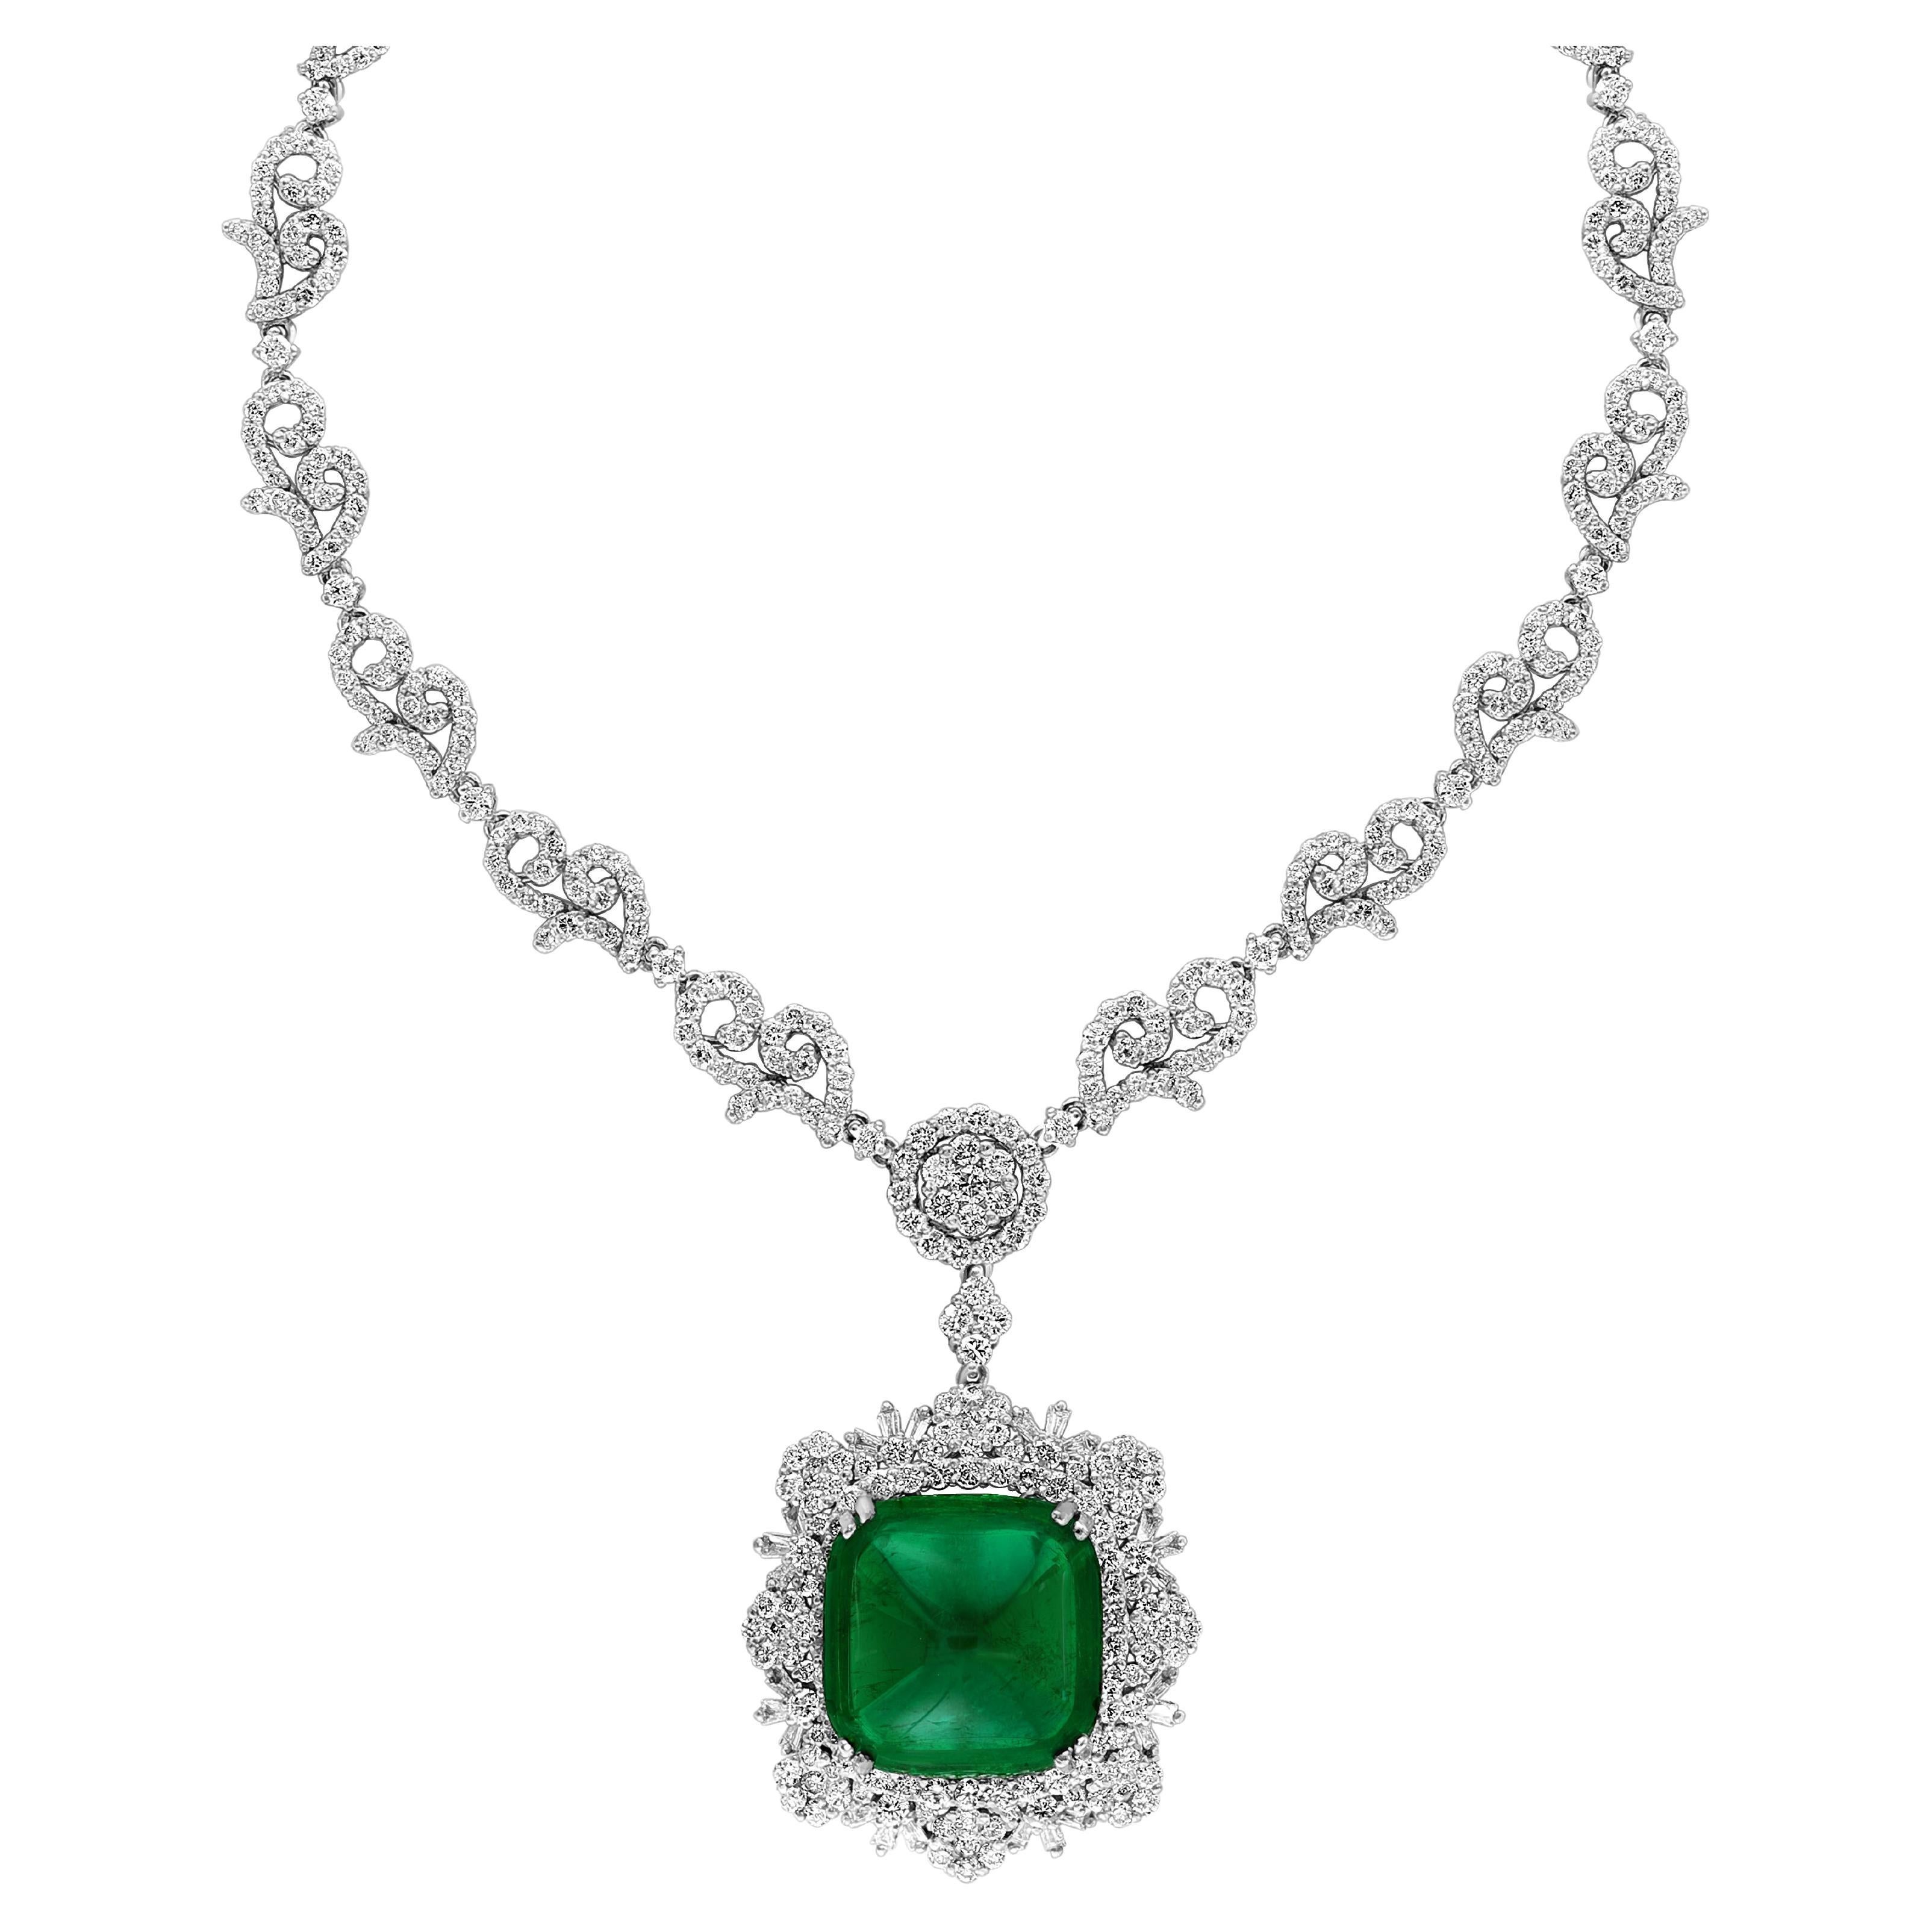 GIA 17 Ct Sugar Loaf Cabochon Colombian Emerald & 13 Ct Diamond Necklace 18KWG For Sale